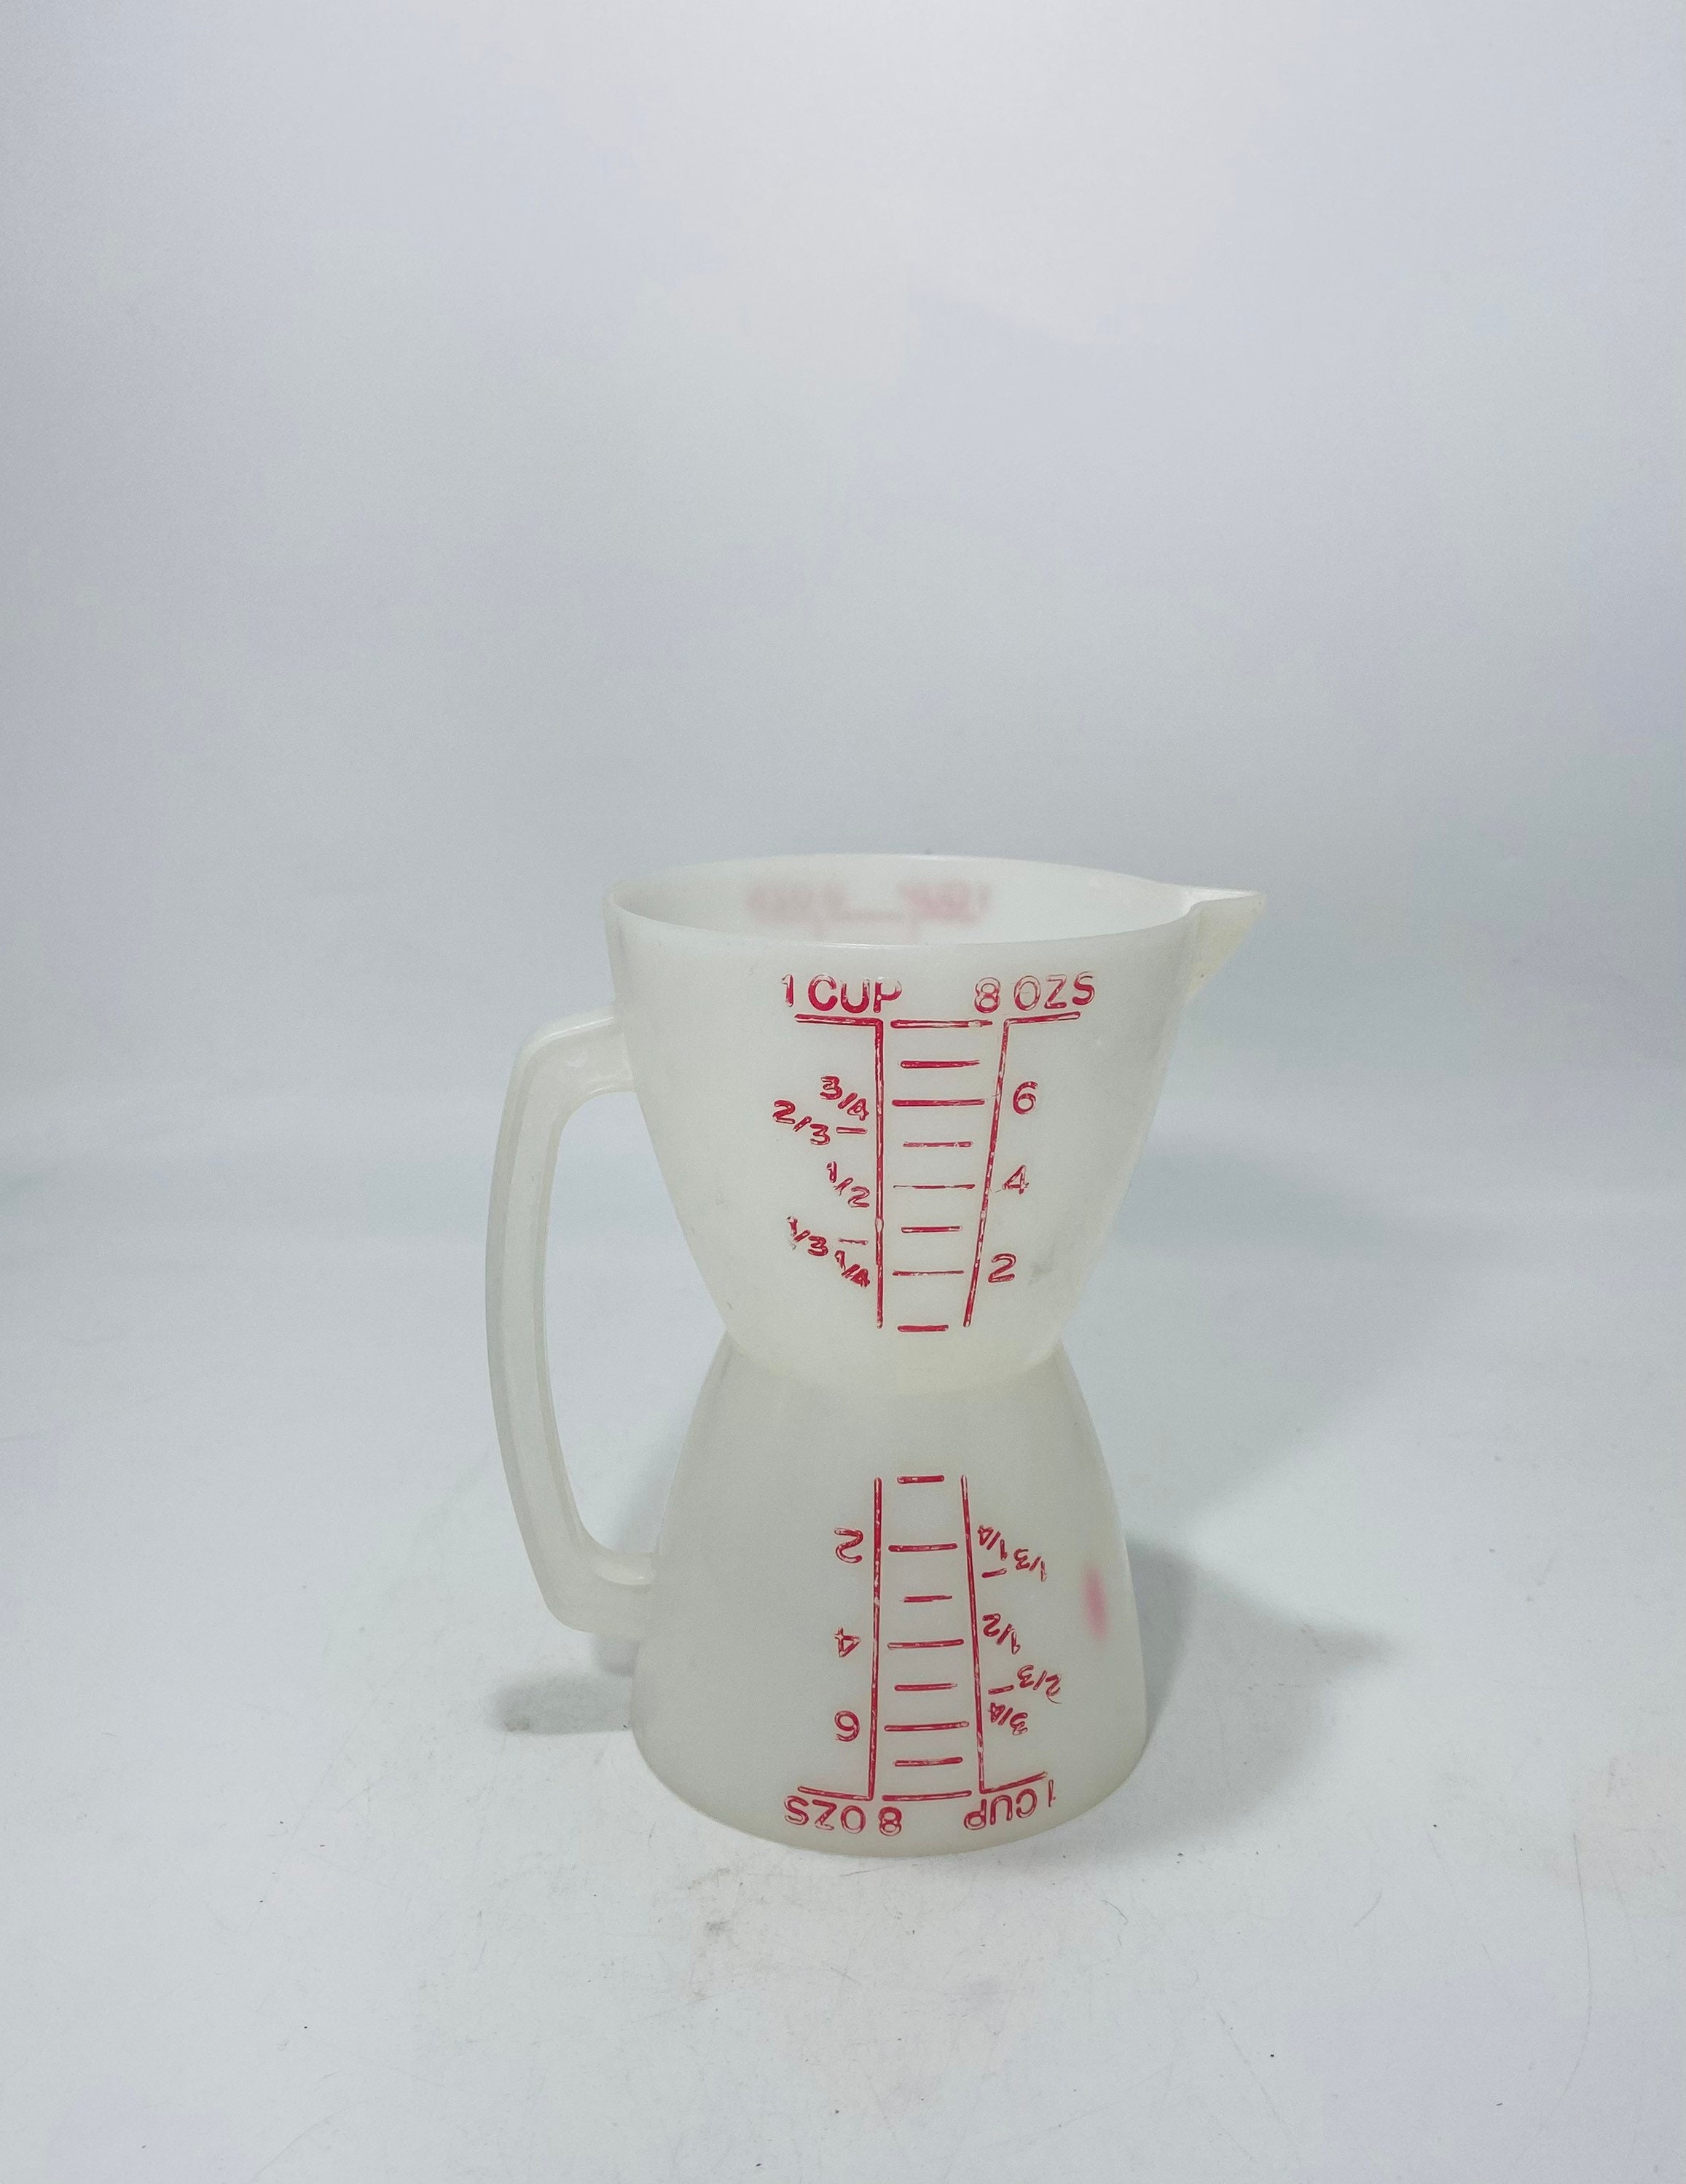 CROW-ADME-20 2 Qt. Dry Measuring Cup